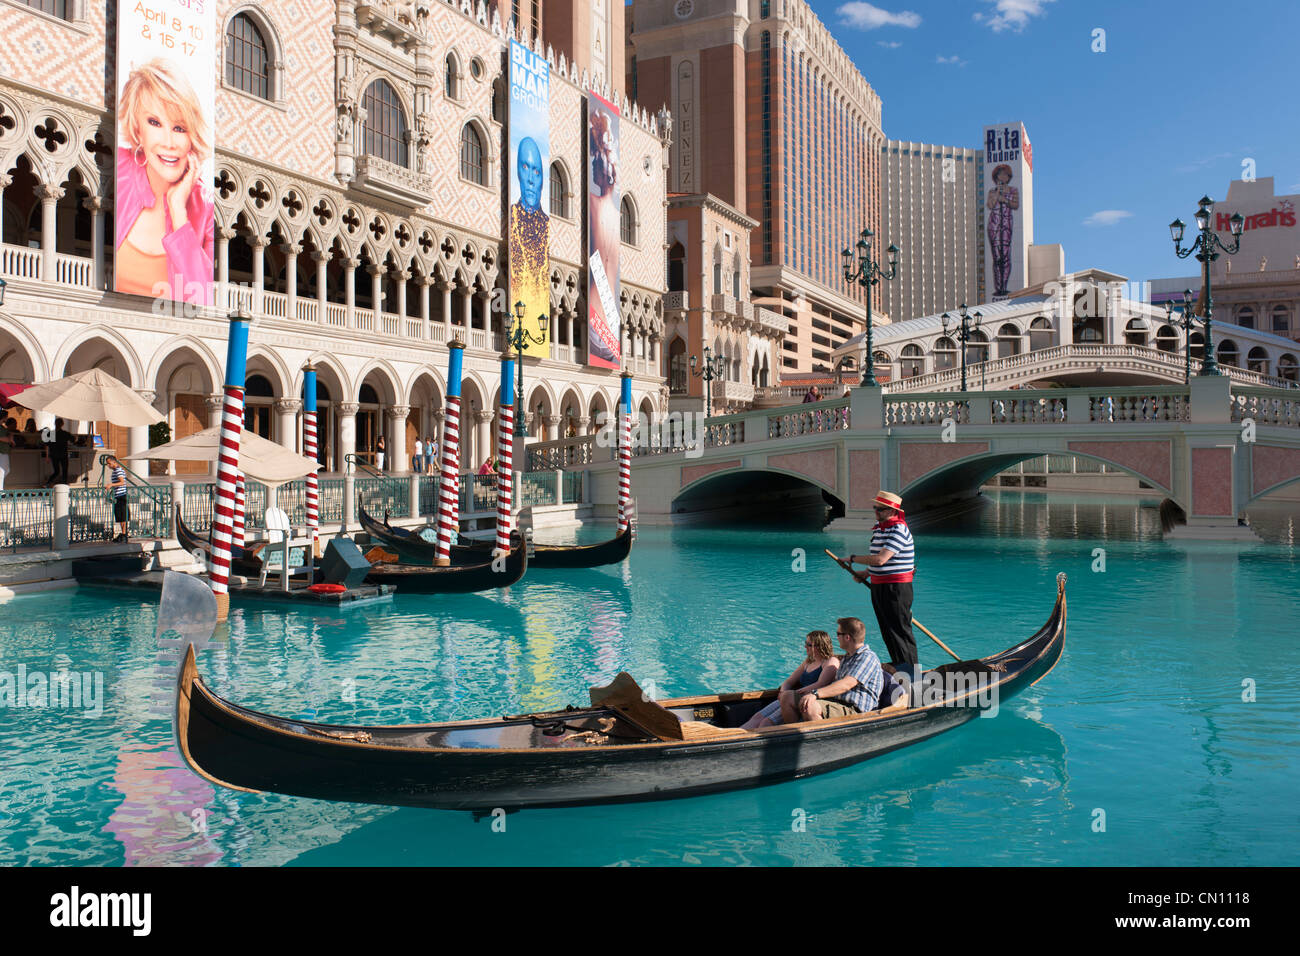 The Venetian Gondola Ride in Las Vegas - What You Need to Know